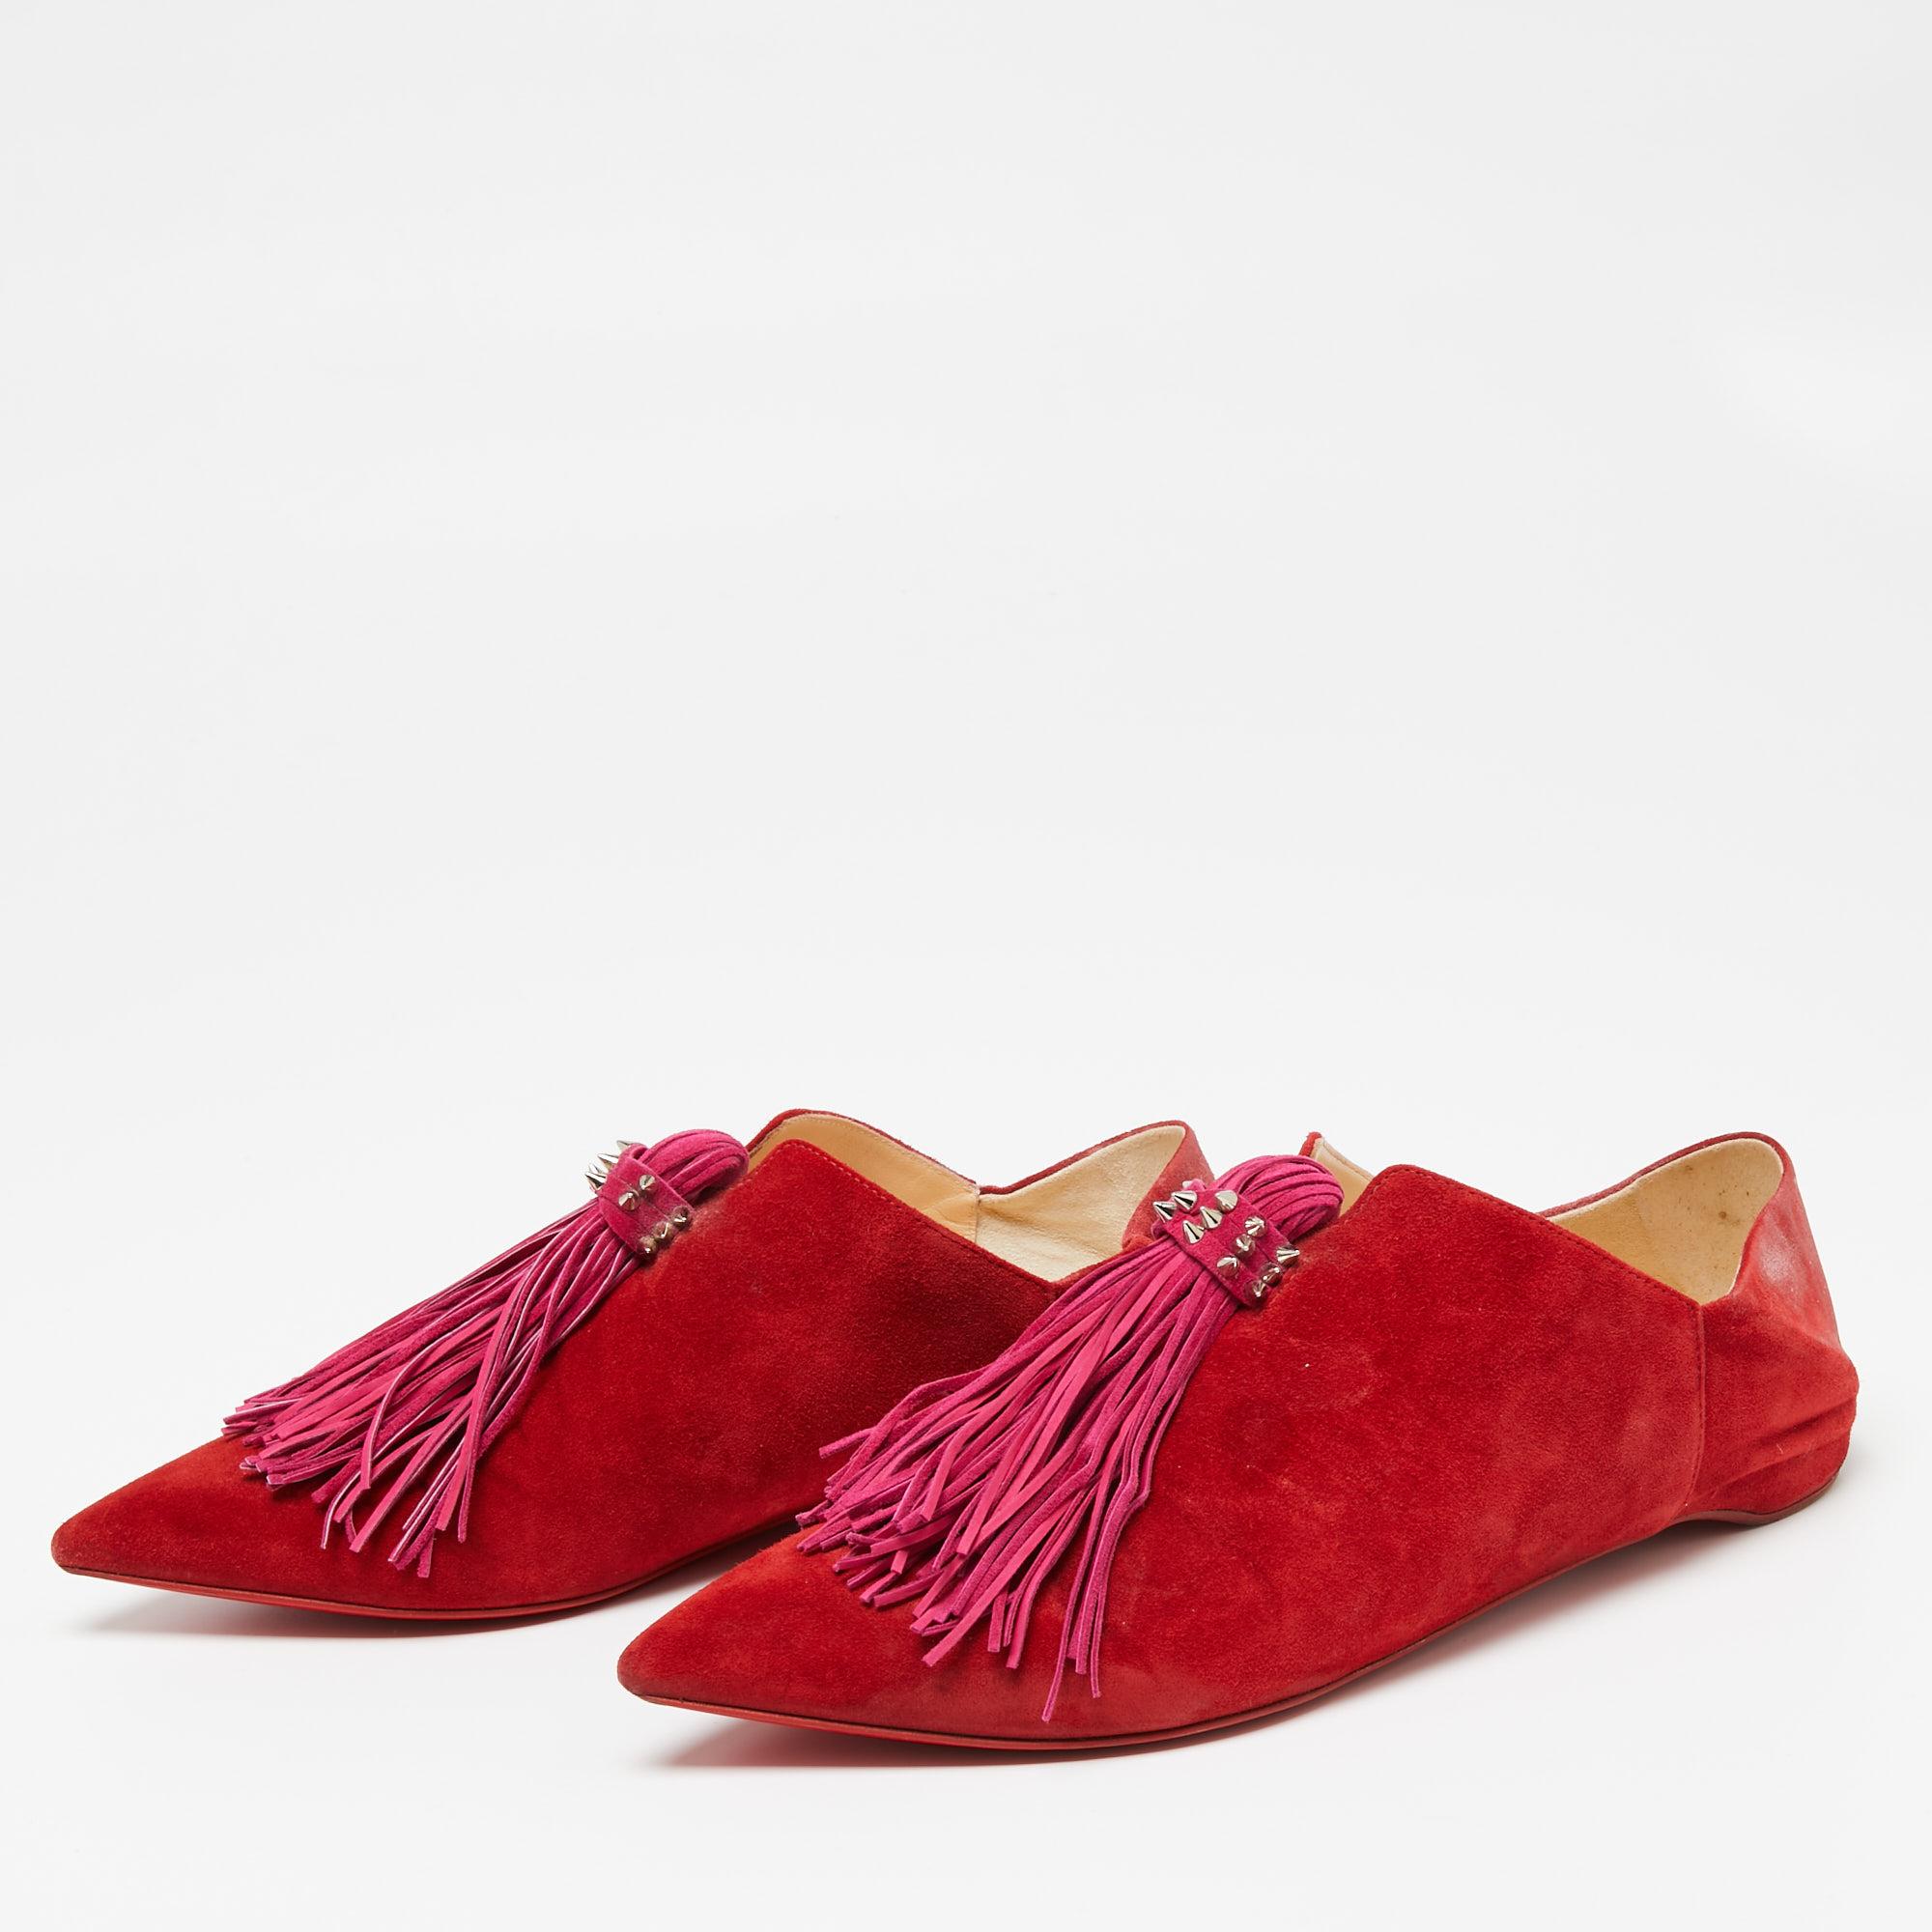 The oversized tassel design on the red upper of these Christian Louboutin sandals serves as a striking element. Crafted from suede into a pointed-toe silhouette, the silver-tone accents make them undeniably chic. The low heels and covered-up